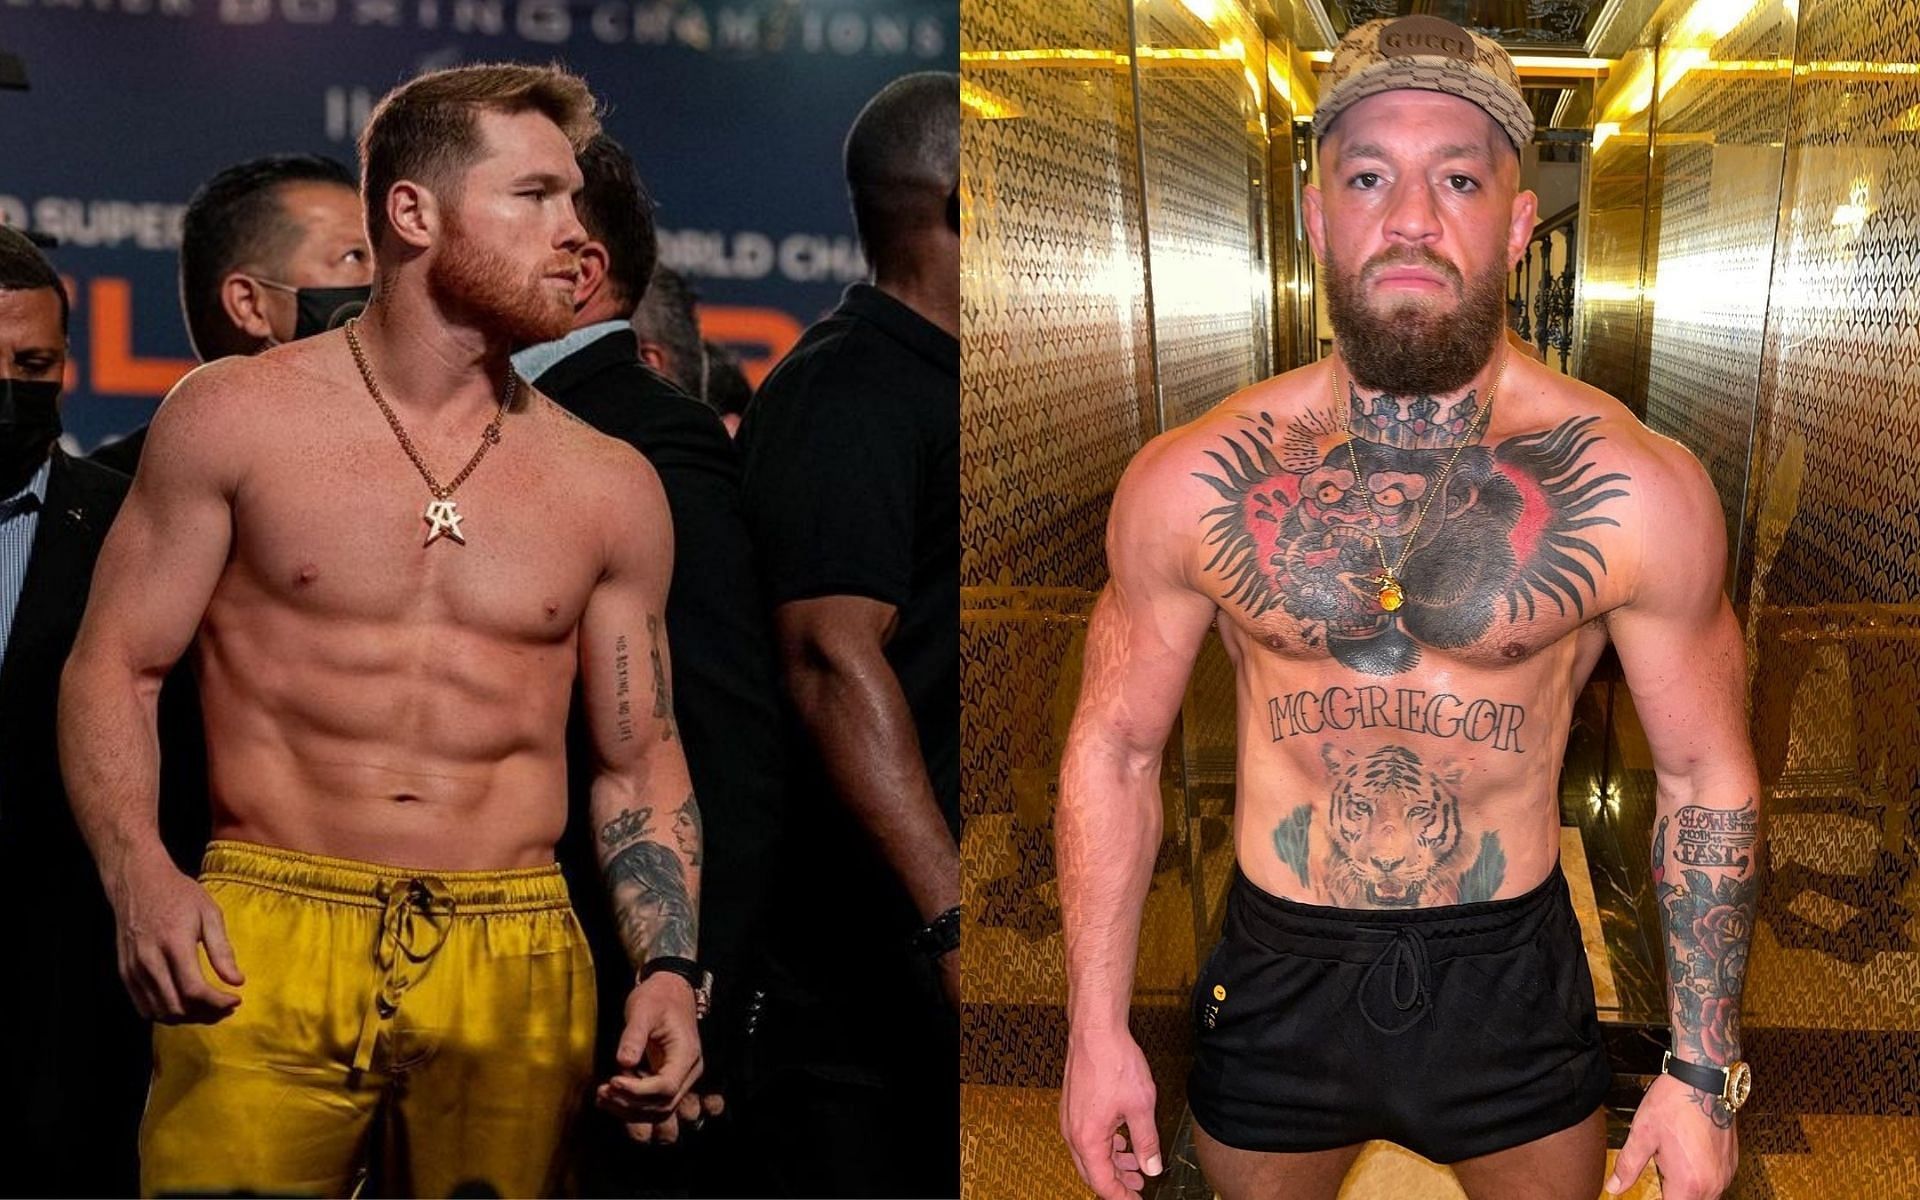 Canelo (left) and Conor McGregor (right) [Image courtesy: @canelo and @thenotoriousmma on Instagram]